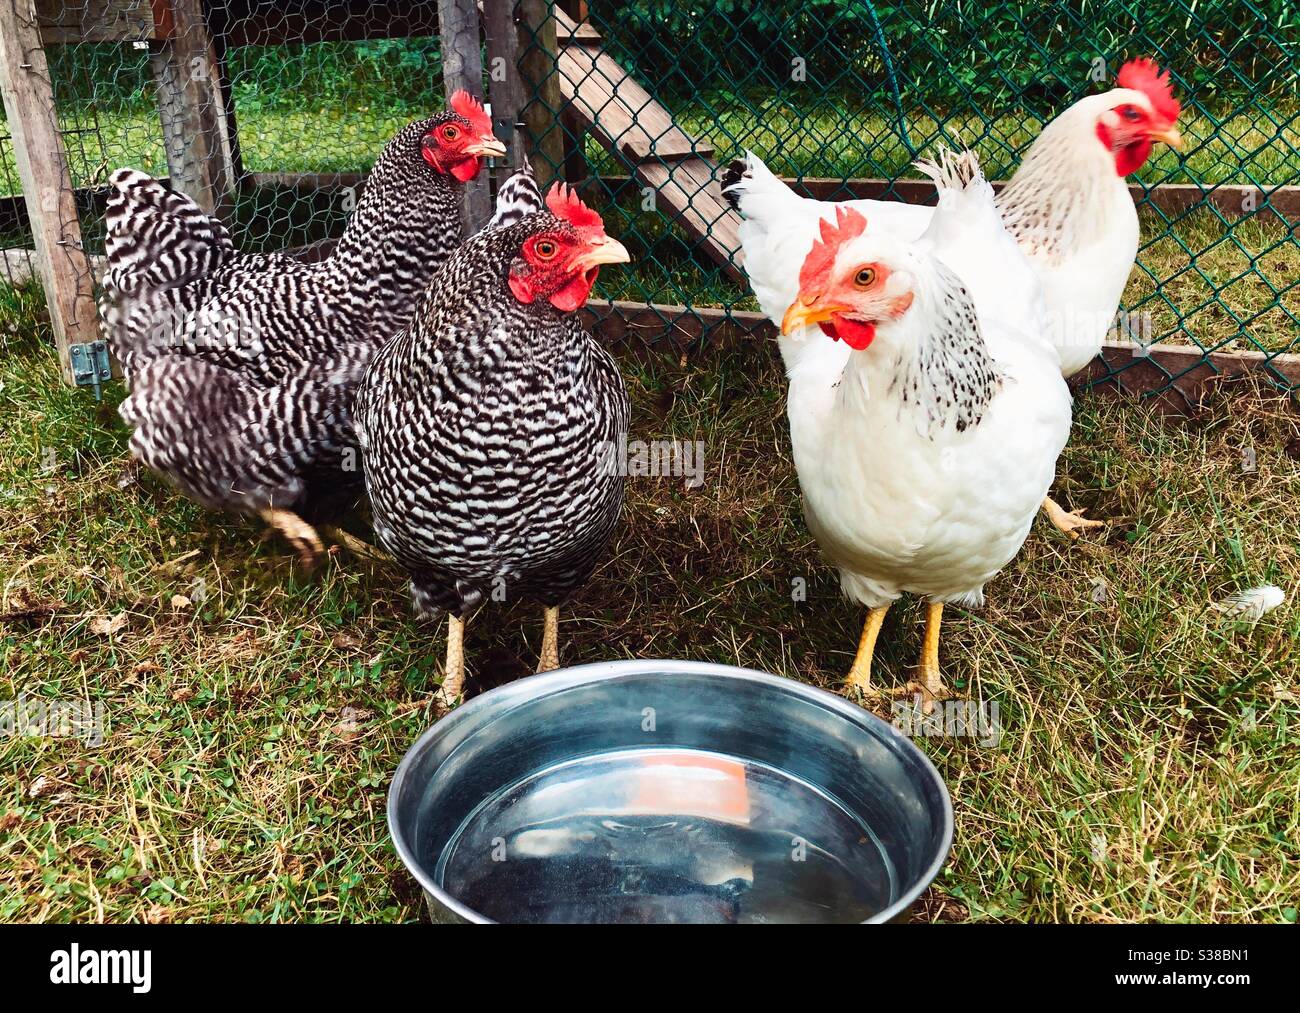 Four backyard chickens with fresh bowl of water in their coop looking at camera Stock Photo